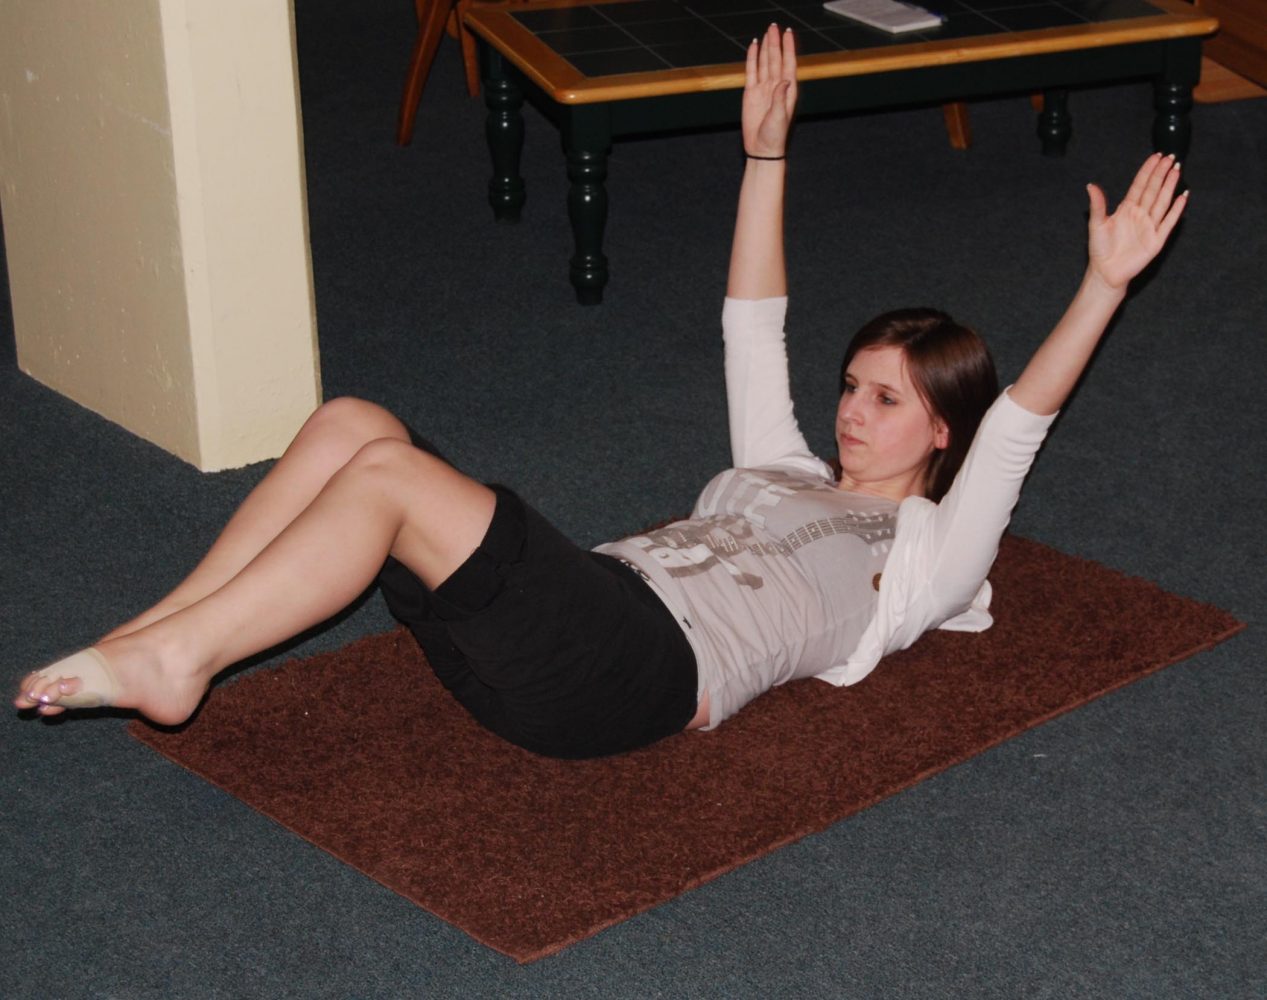 Resident assistant starts Pilates class in basement